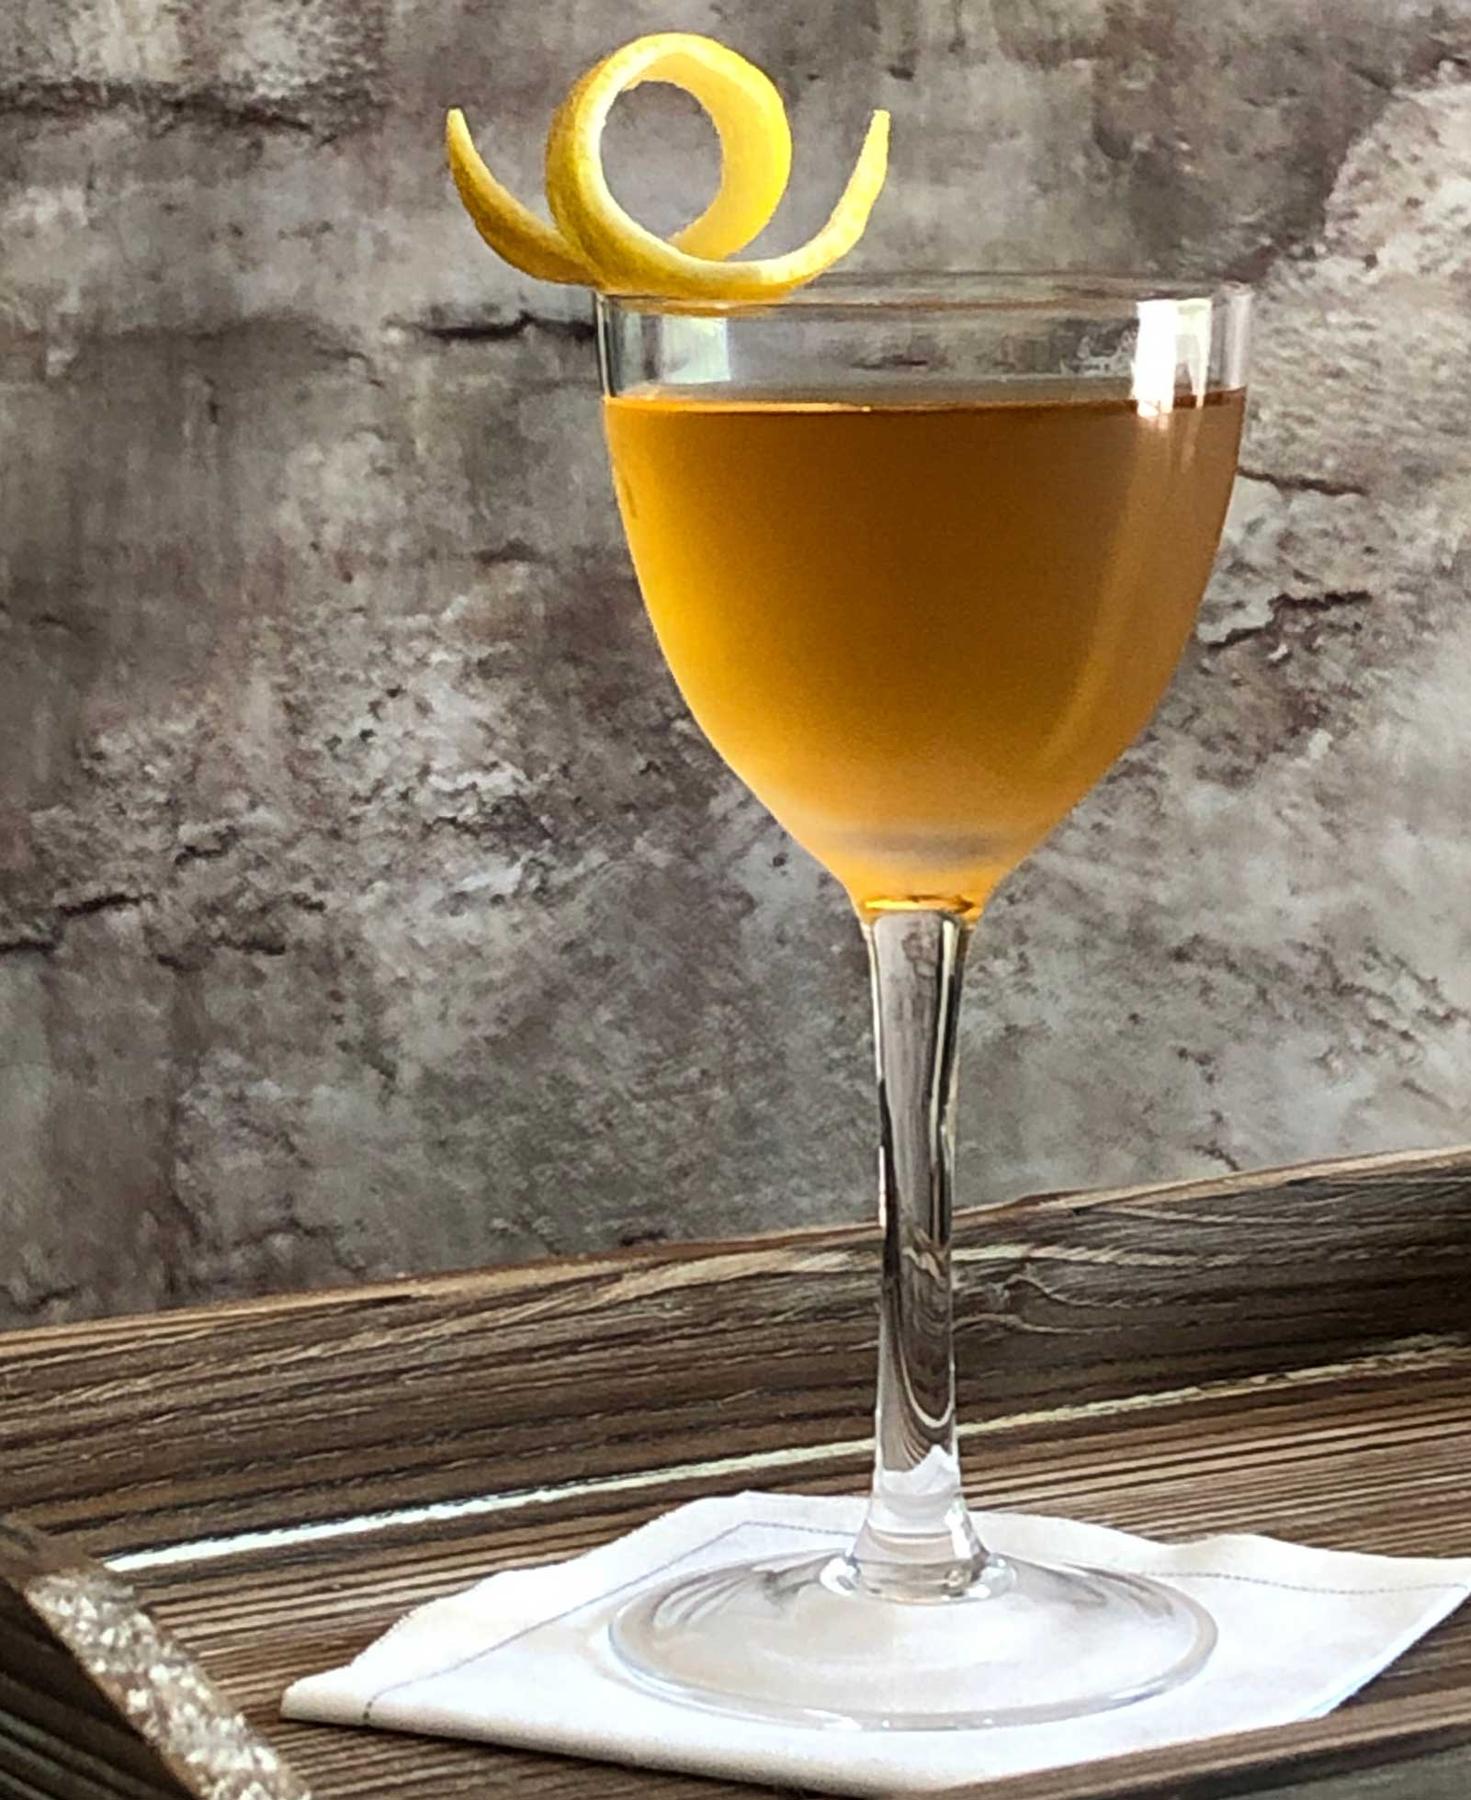 An example of the Czarina, the mixed drink (drink), by David Embury, The Art of Mixing Drinks, featuring vodka, Blume Marillen Apricot Eau-de-Vie, Dolin Dry Vermouth de Chambéry, Cocchi Vermouth di Torino ‘Storico’, and lemon twist; photo by Lee Edwards